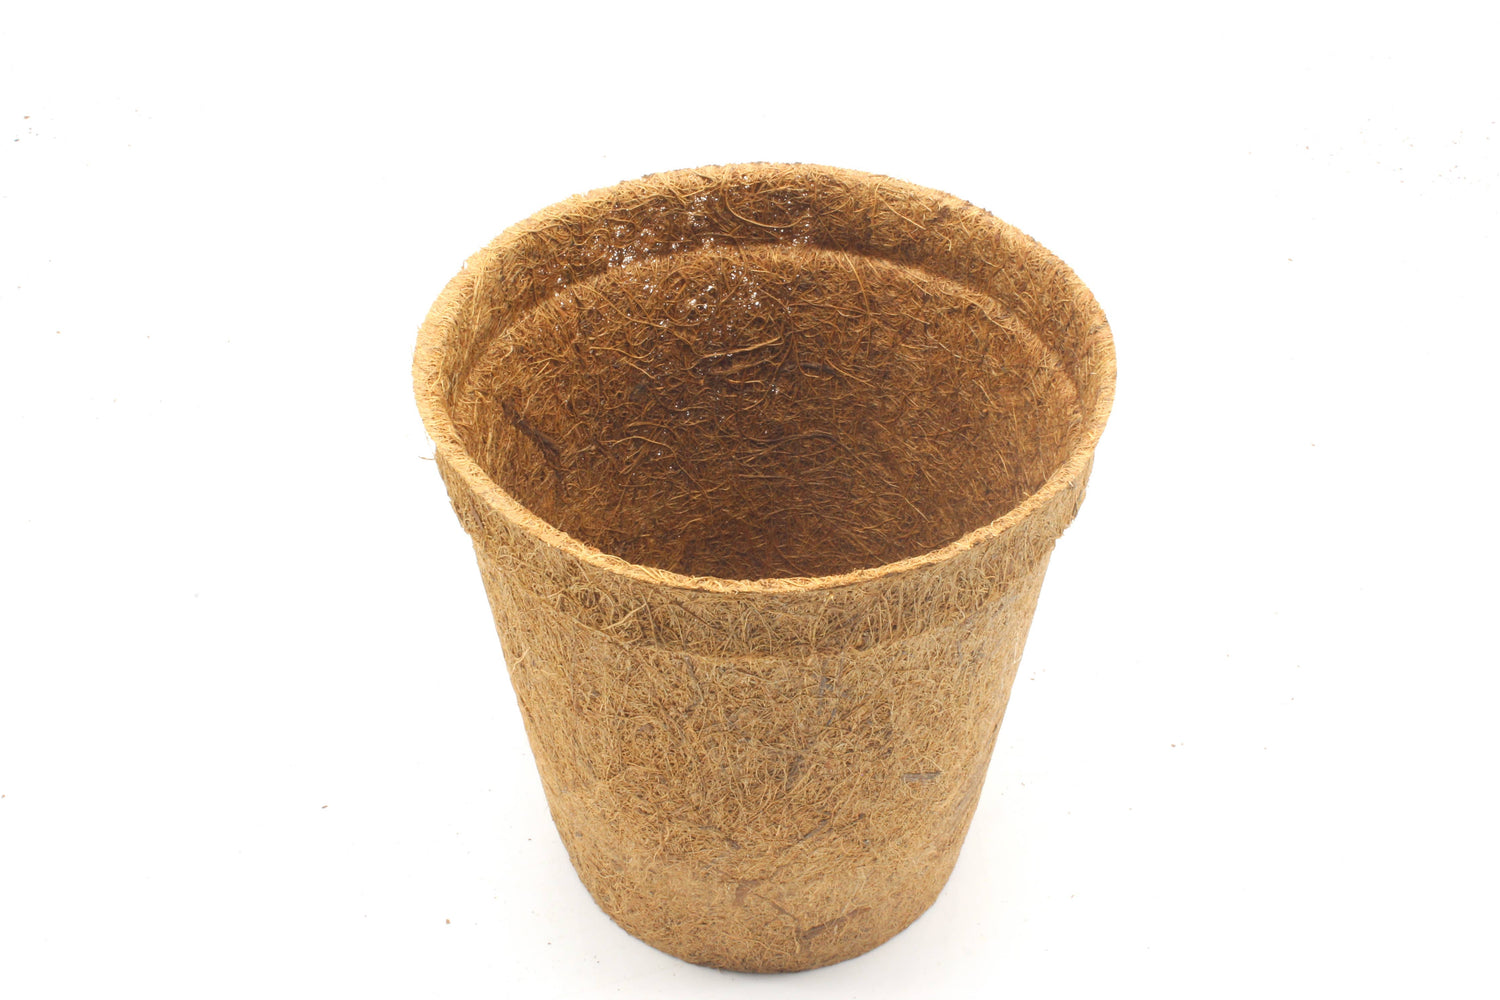  CoirProducts 17 cm Coir Pots | Plant Pots | 100% Biodegradable | 2.8 Ltr CP17 The Green Thumb Club